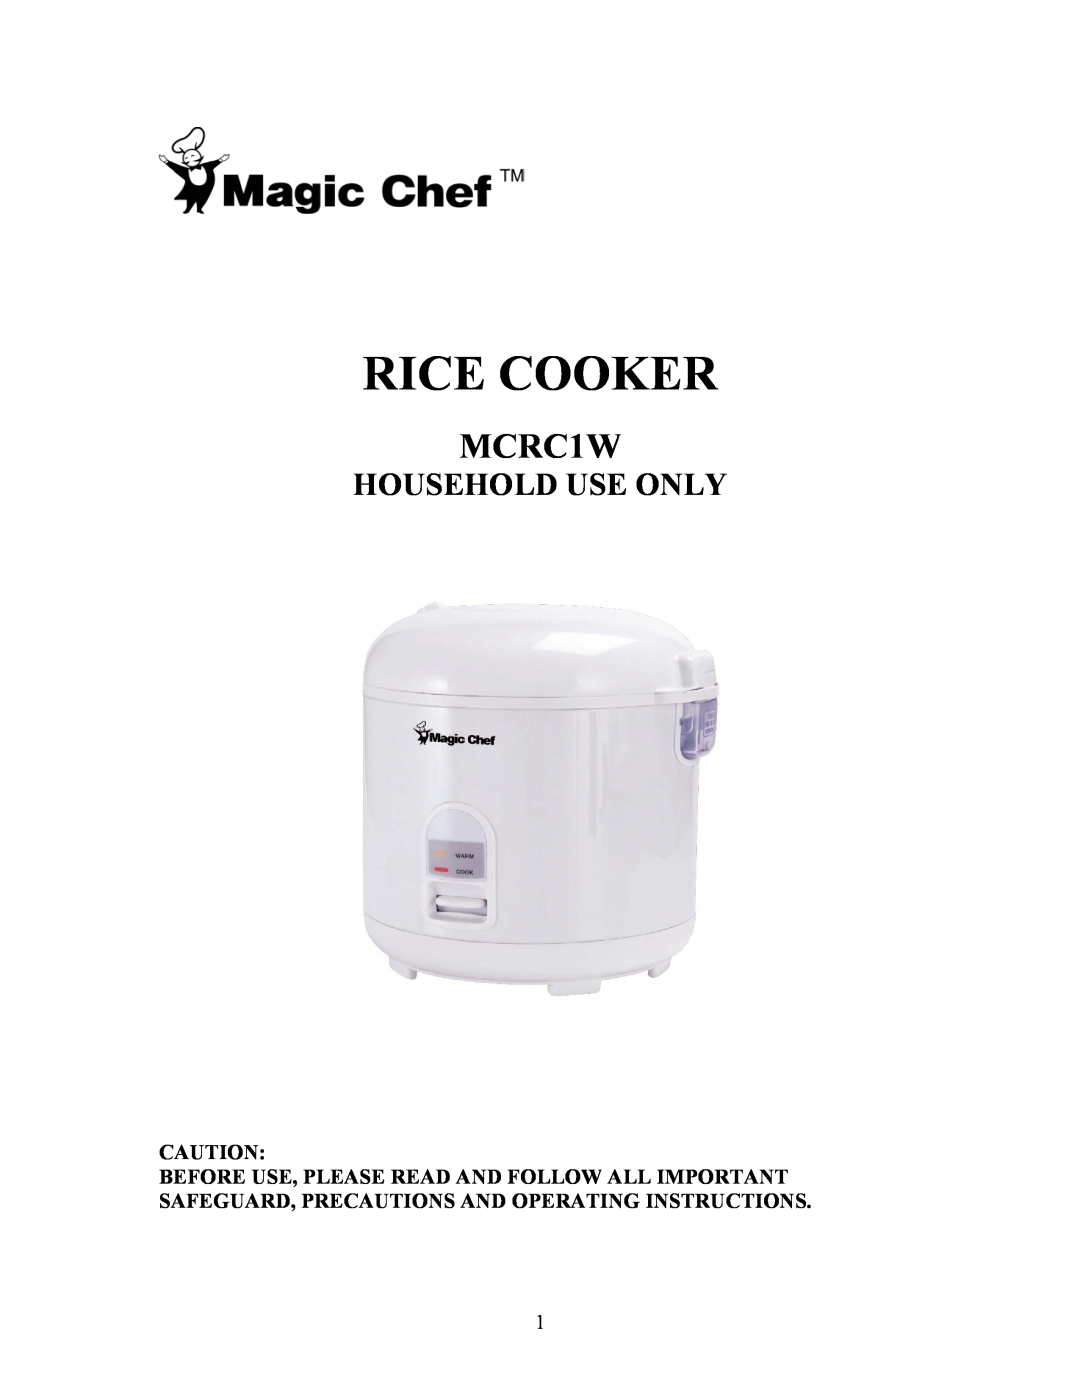 Magic Chef MCRC1W manual Rice Cooker, Household Use Only 